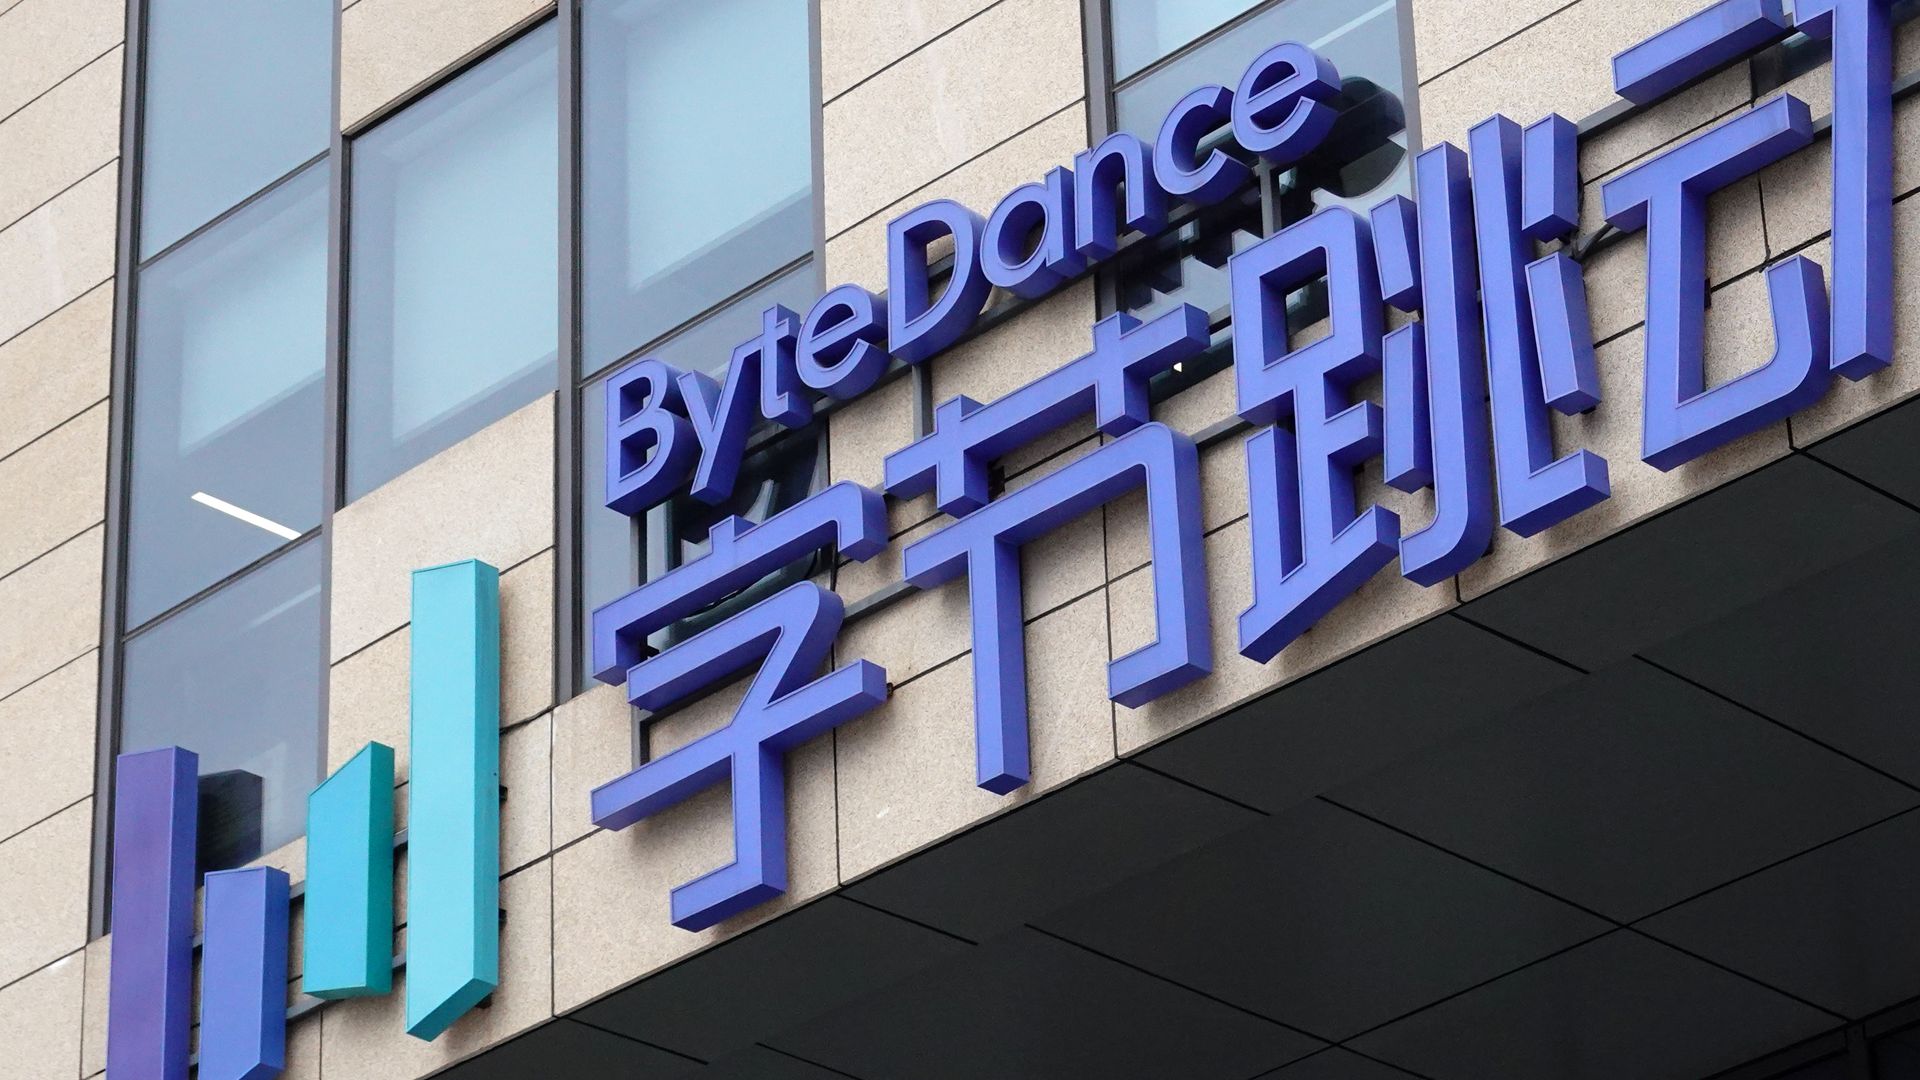 According to a lawsuit filed by a former top executive at ByteDance, the Chinese government "maintained supreme access" to company data.